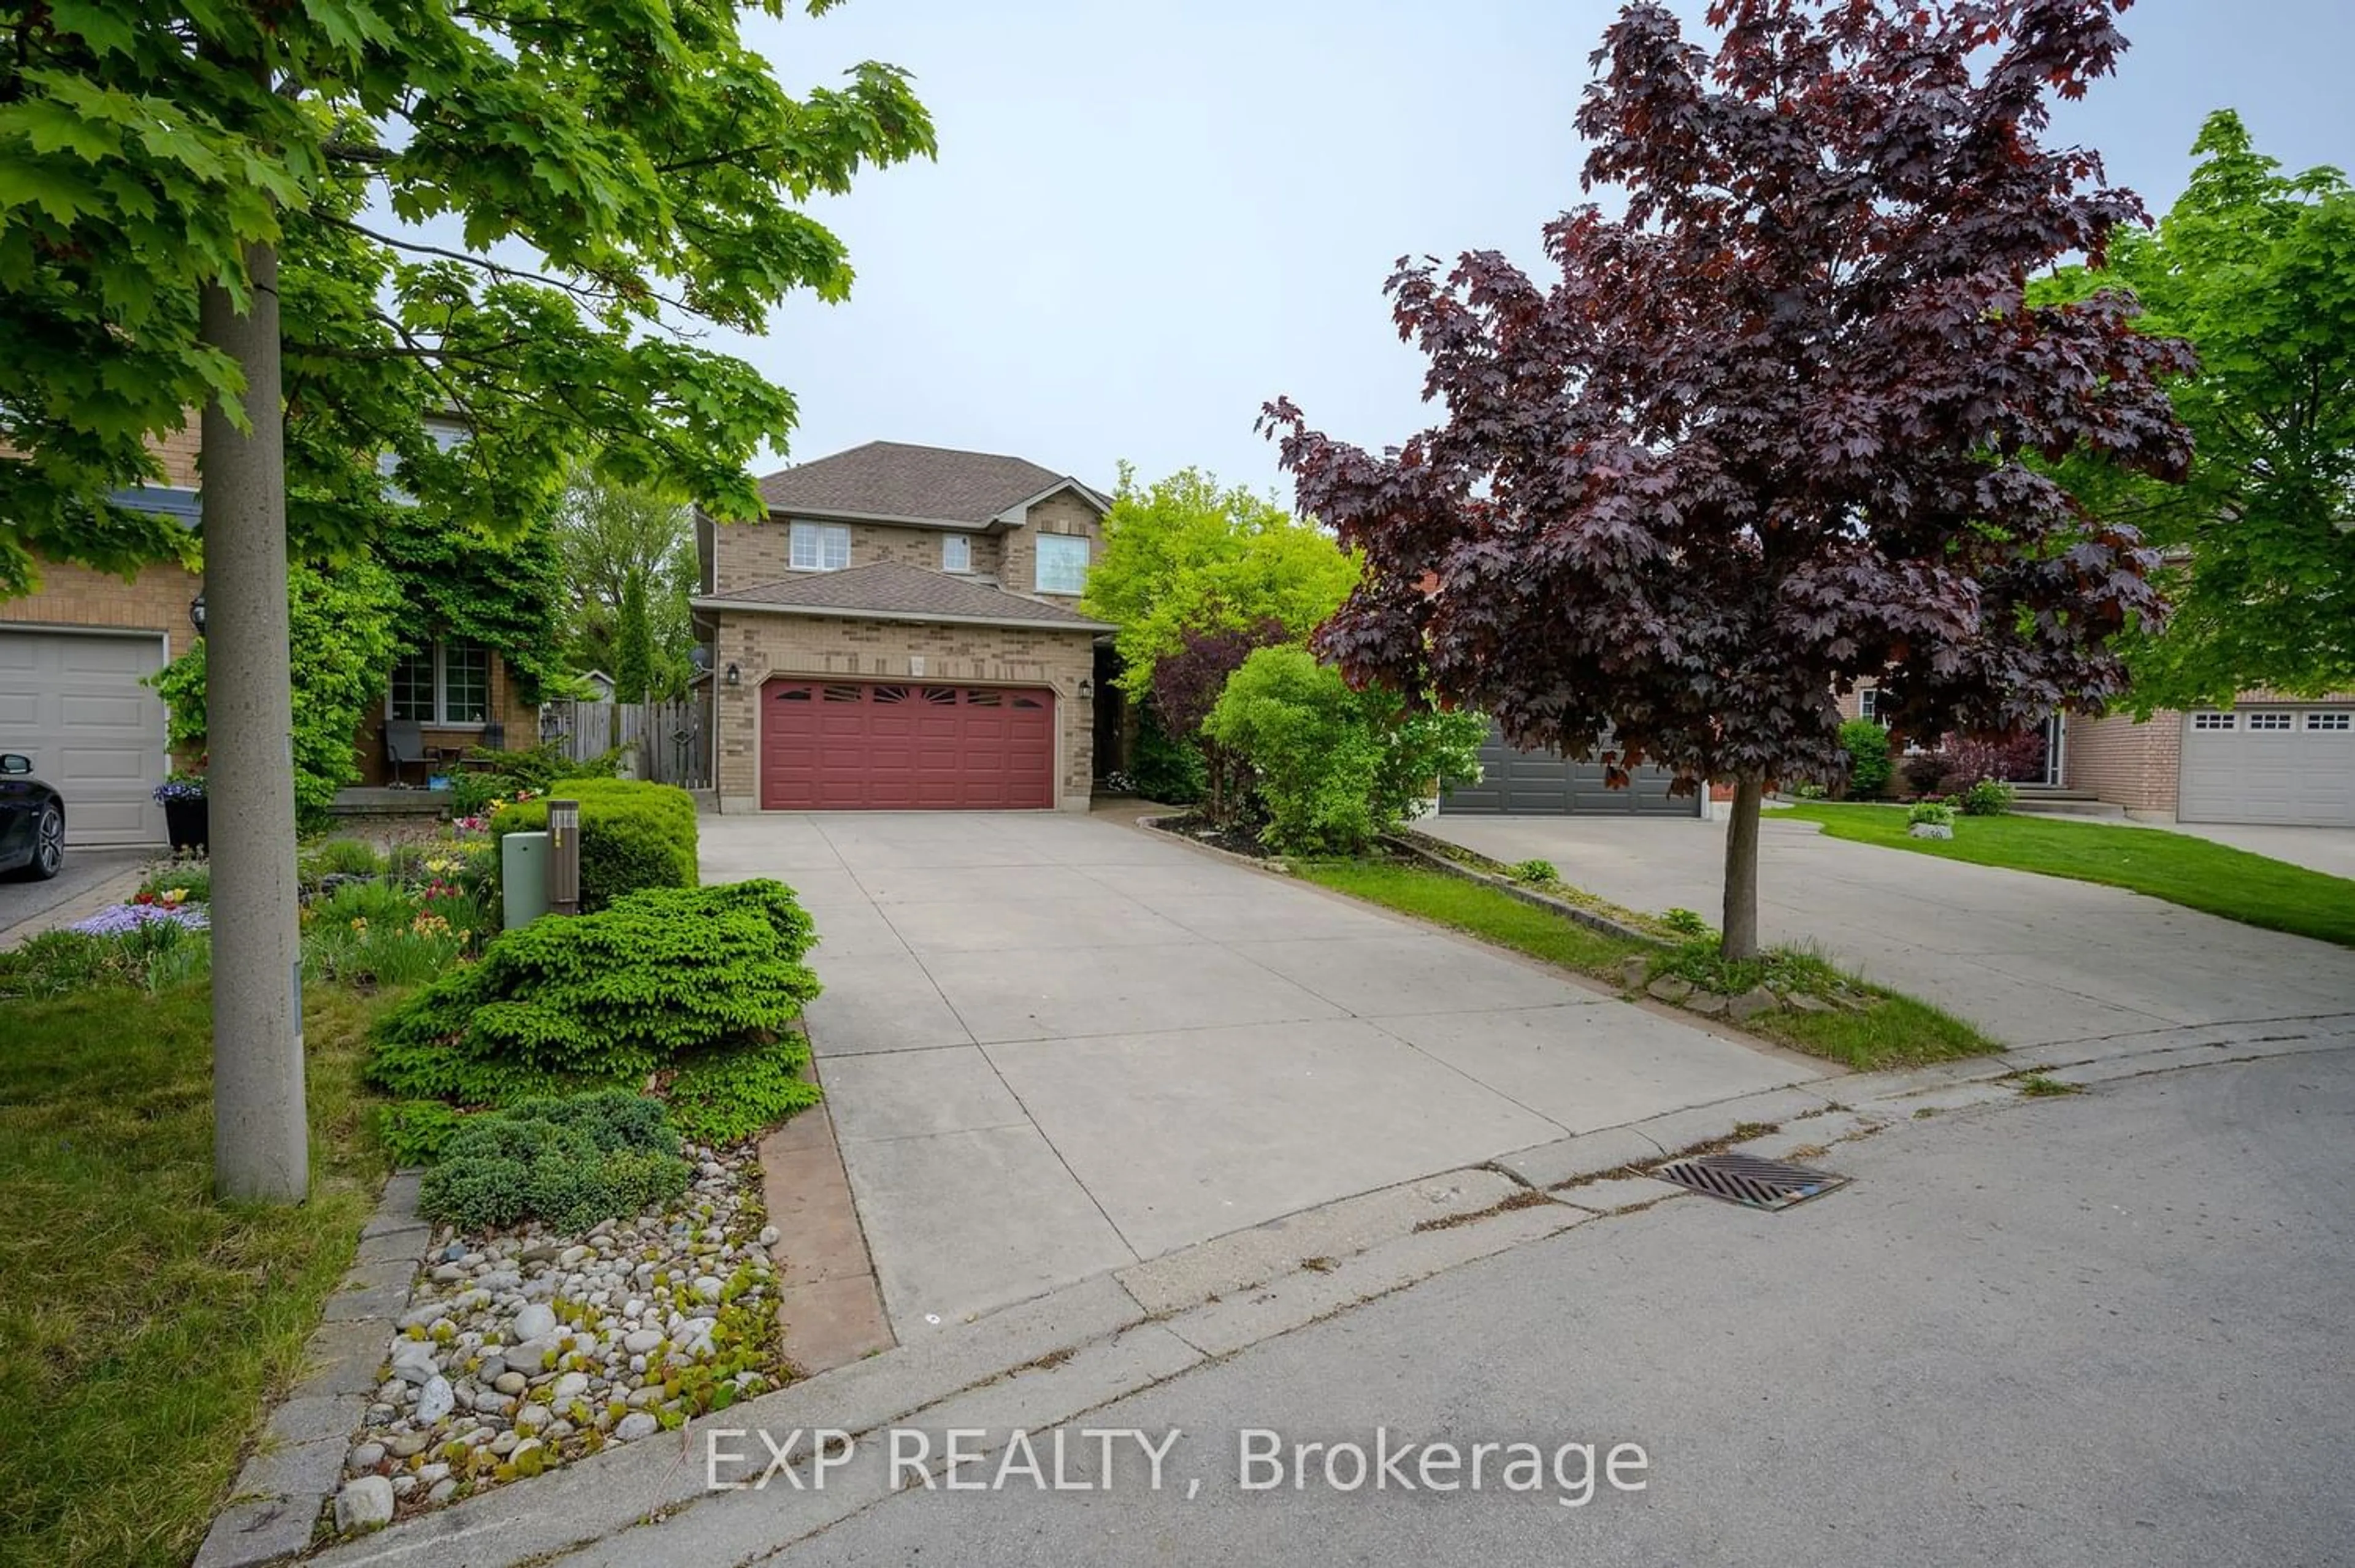 Frontside or backside of a home for 52 Hillgarden Dr, Hamilton Ontario L8J 3R3